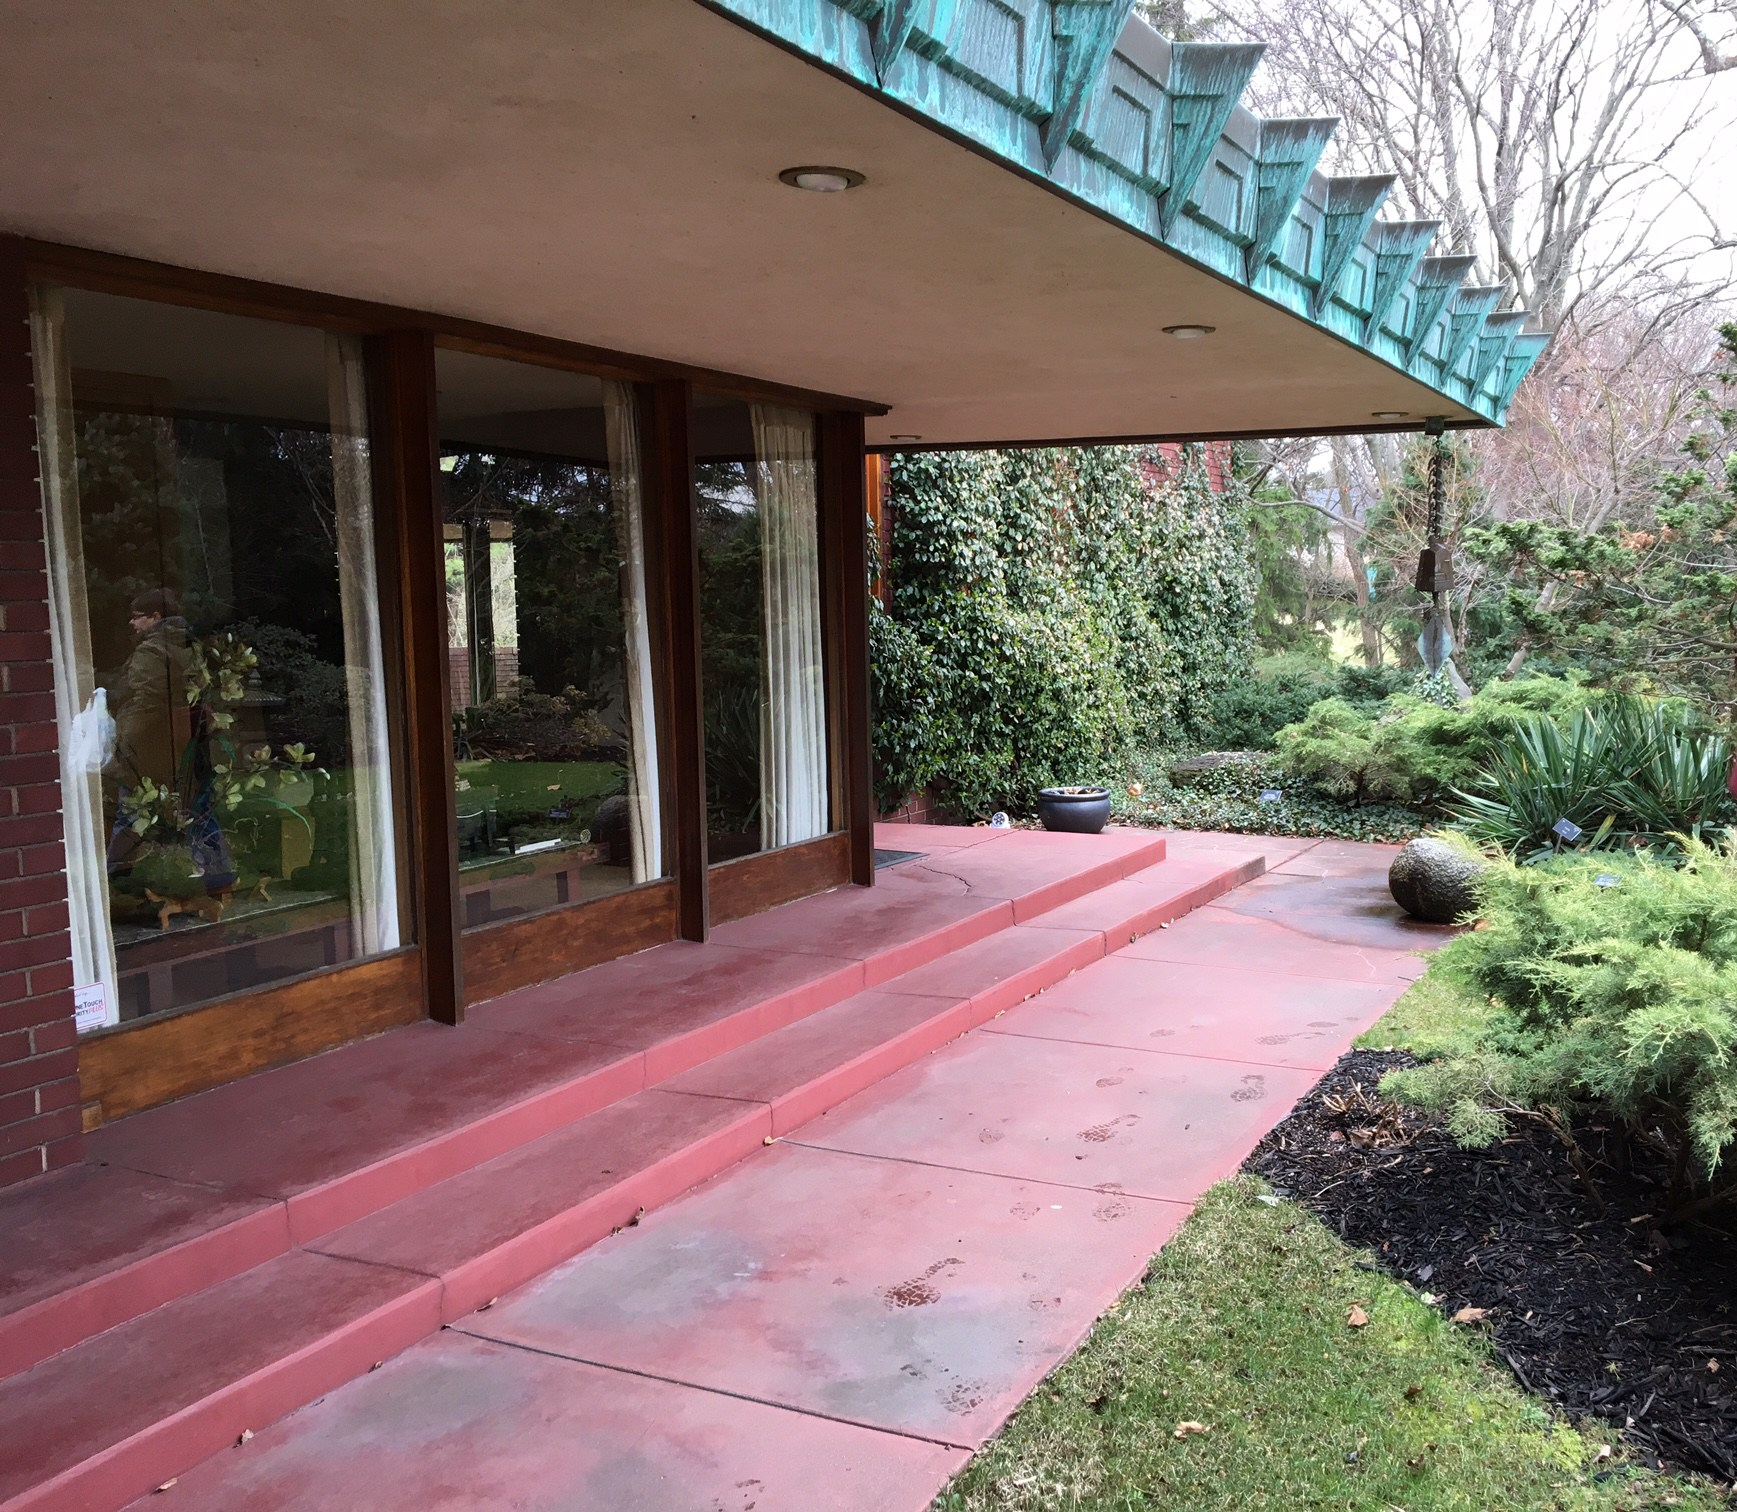 Samara is one of the last examples of Frank Lloyd Wright's Usonian period designs.